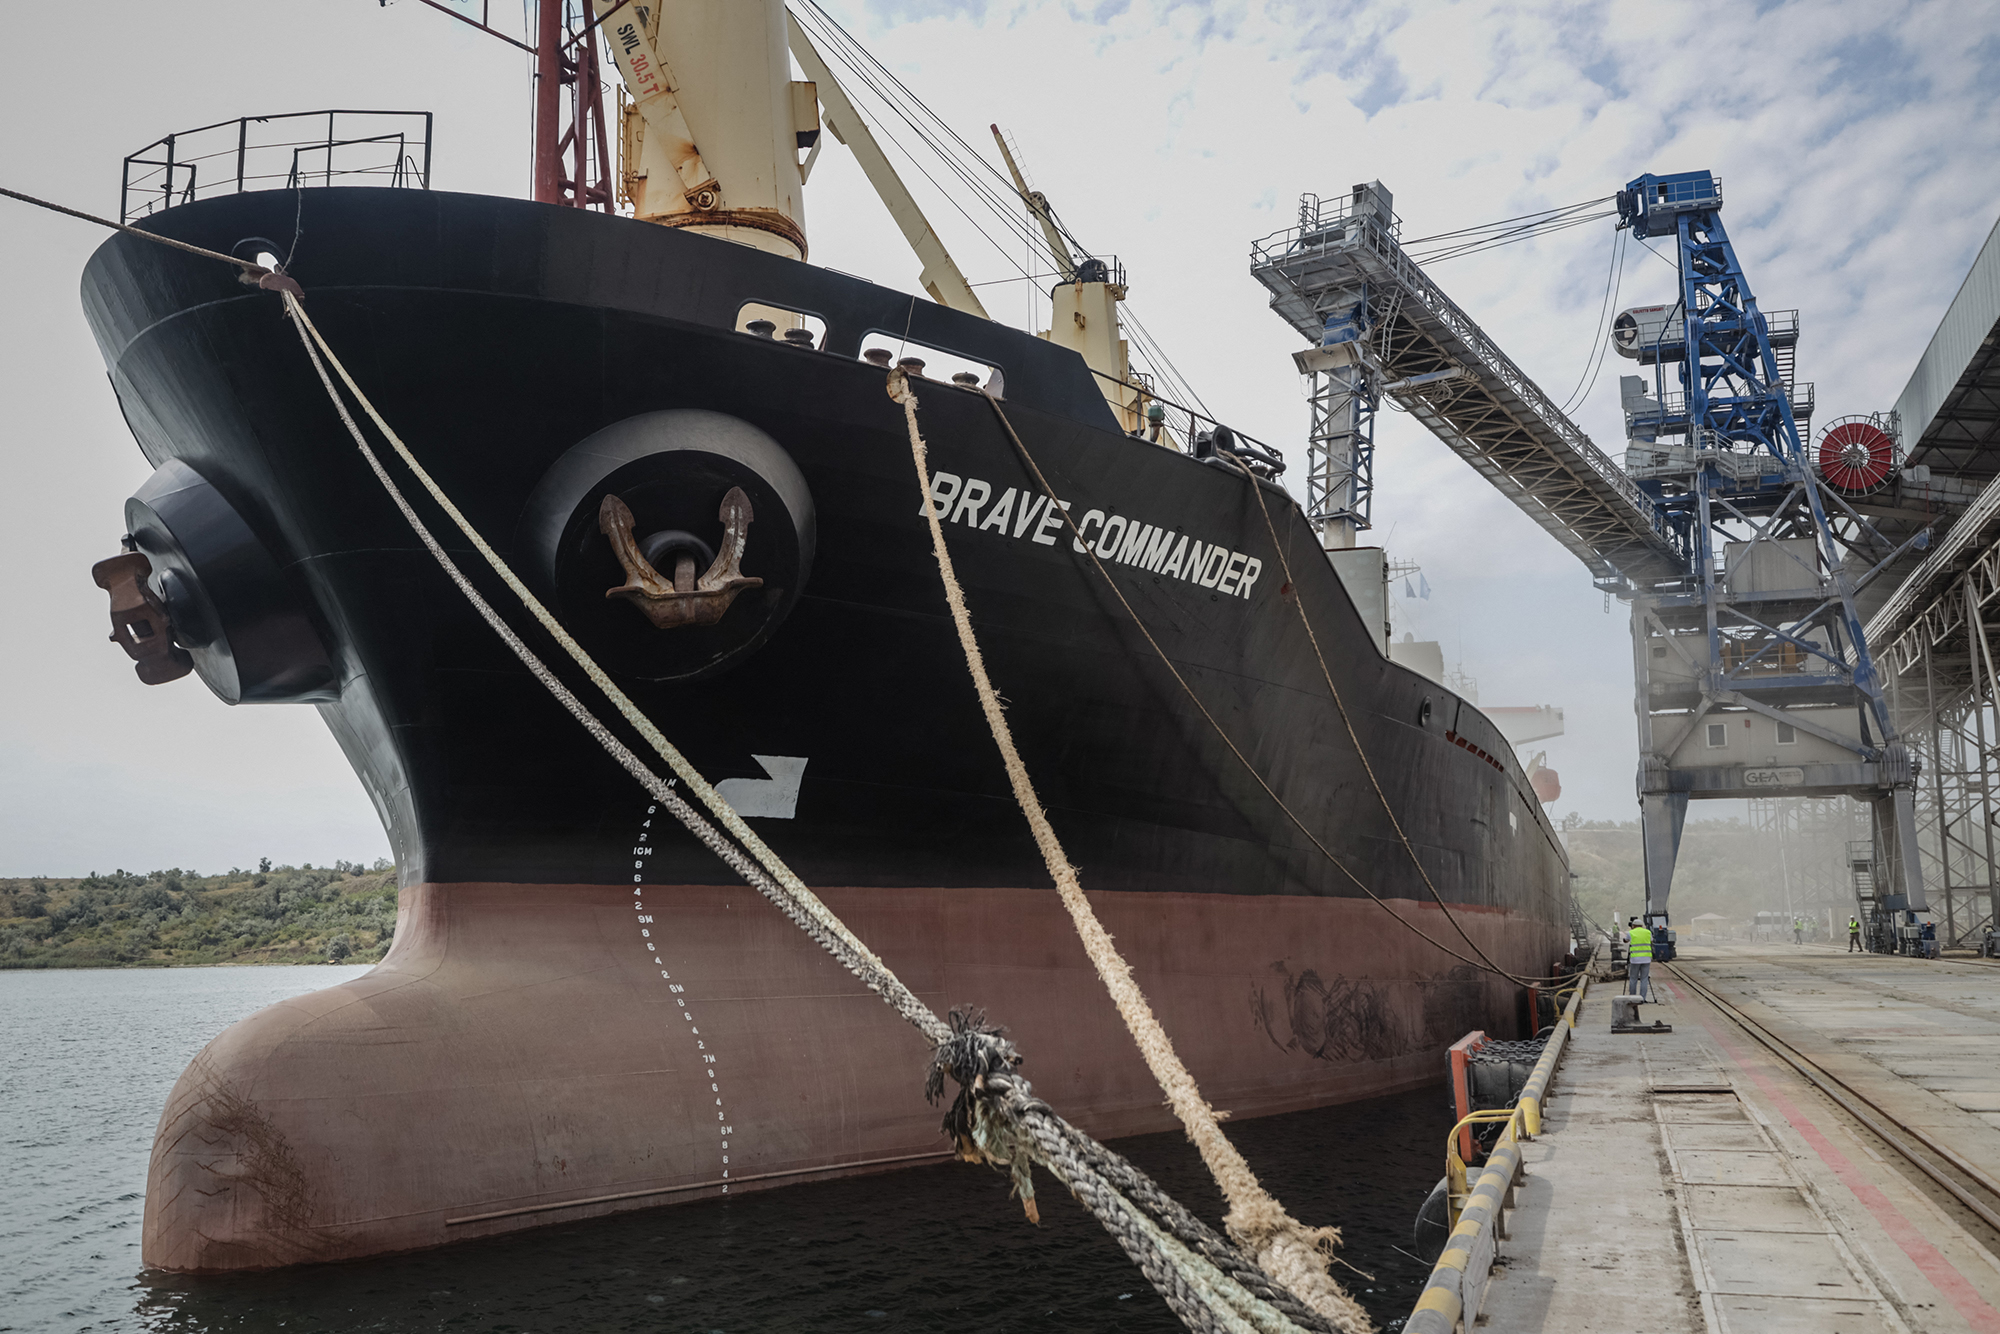 The first UN-chartered vessel MV Brave Commander loads more than 23,000 tonnes of grain to export to Ethiopia, in Yuzhne, east of Odessa on the Black Sea coast, on August 14, 2022.